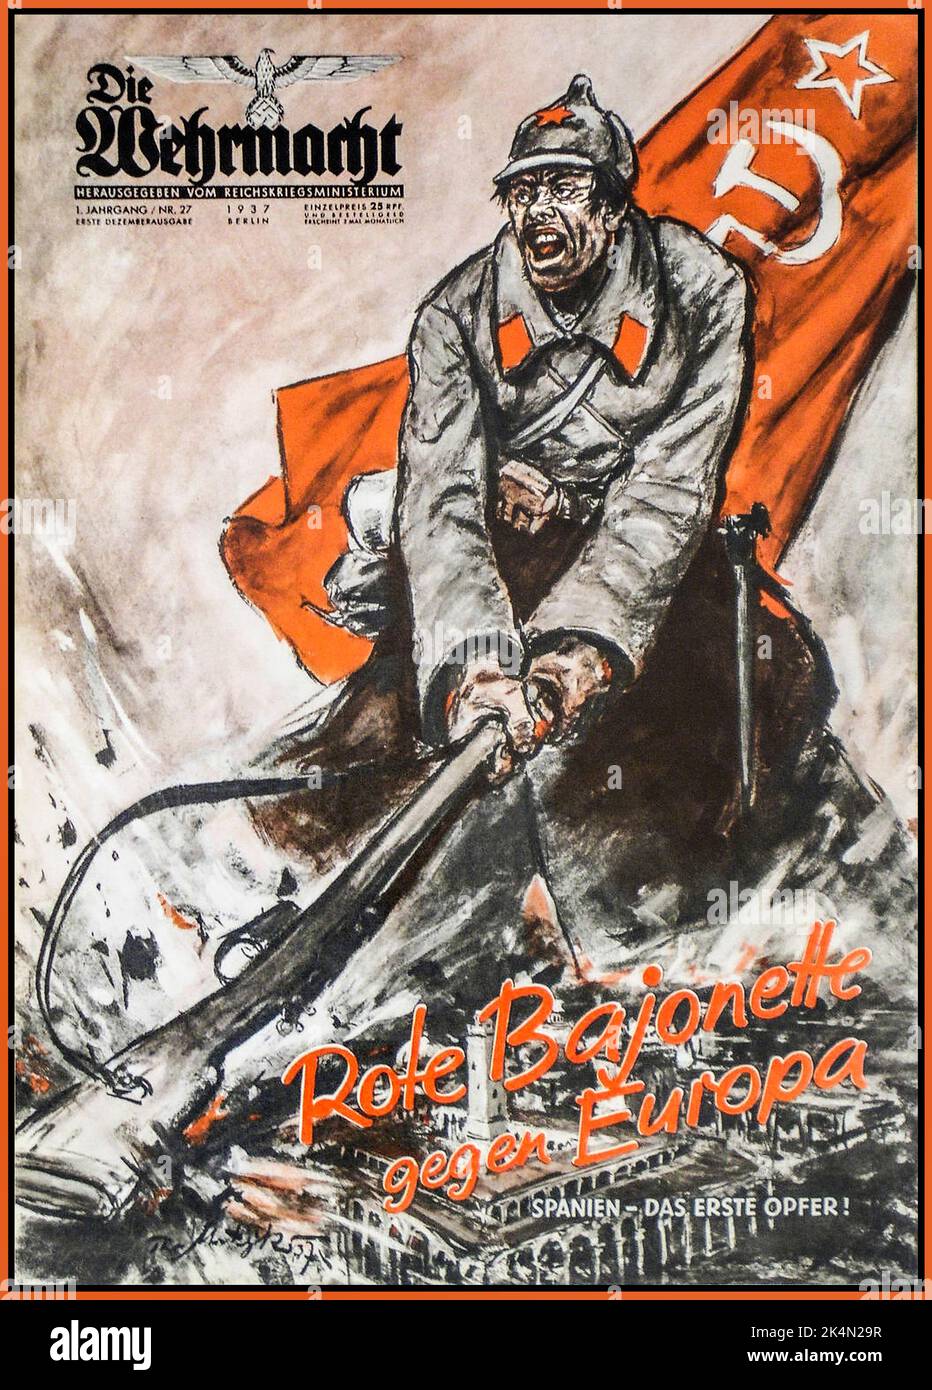 Nazi Germany Propaganda magazine DIE WEHRMACHT 1937 The Wehrmacht Red bayonets against Europe. Spain the first victim featuring a Soviet Union Russian soldier with Hammer and Sickle flag behind, crashing his rifle down on a Spanish building Nazi Germany 1930s Stock Photo